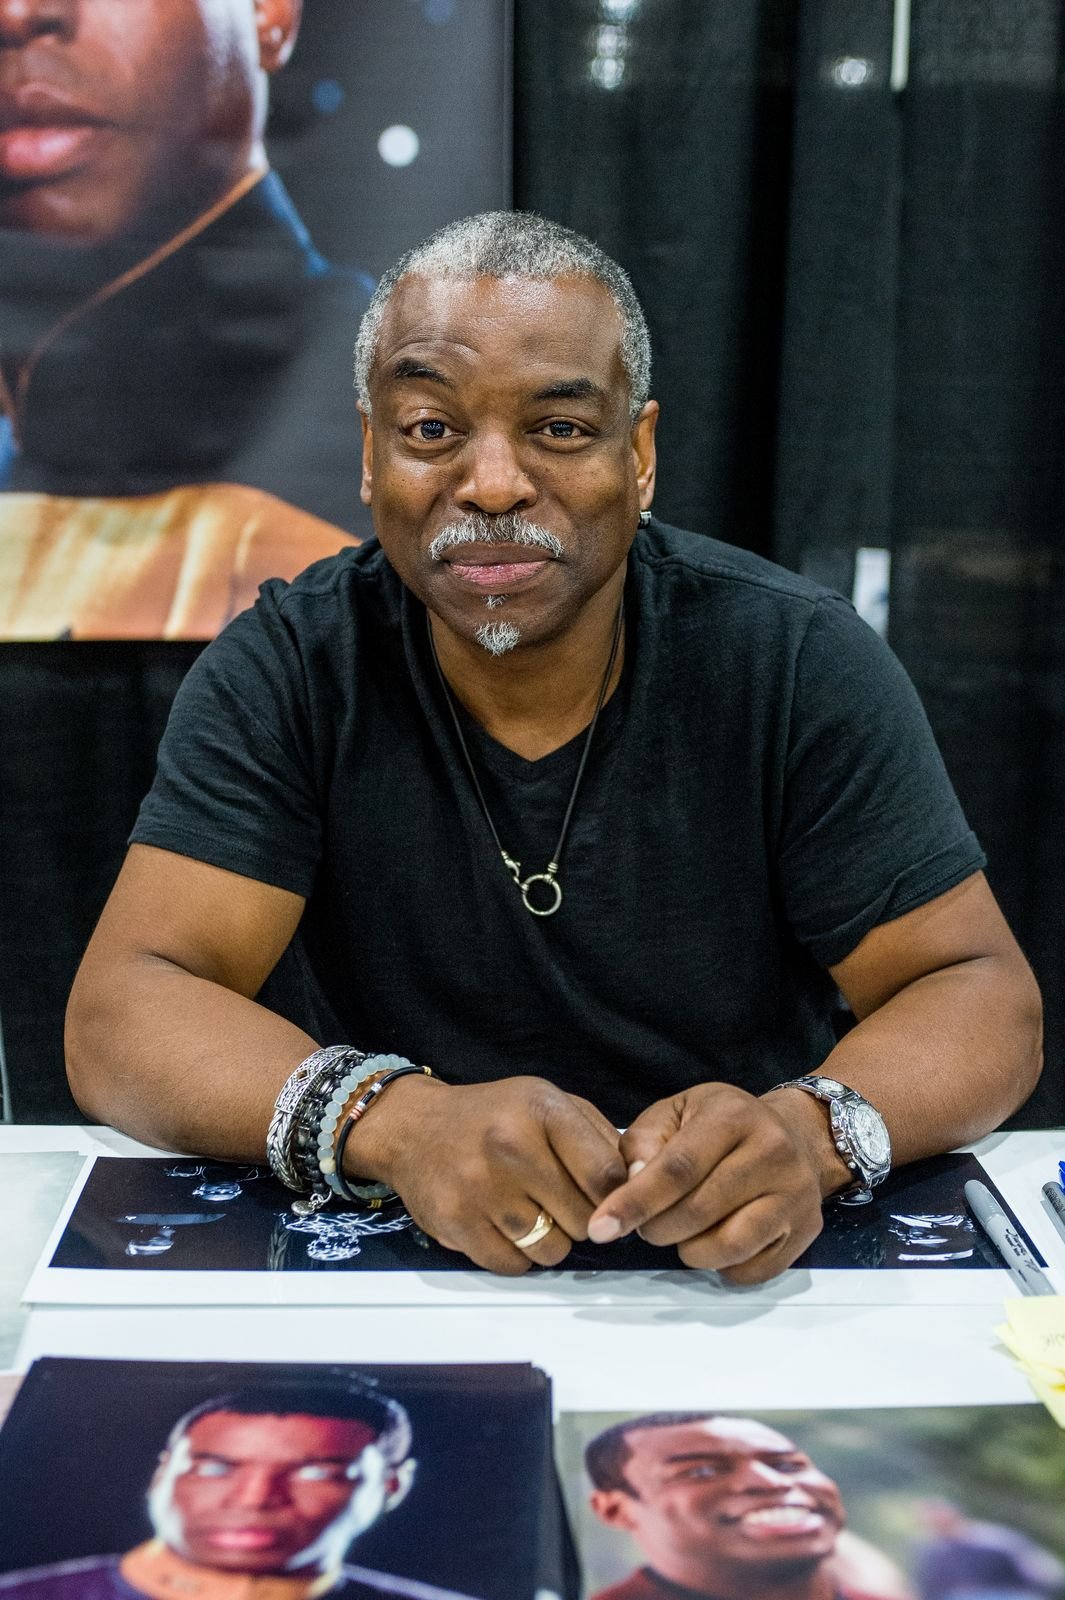 LeVar Burton at day three of the "Star Trek: Mission New York" event on September 4, 2016, in New York City | Photo: Roy Rochlin/Getty Images